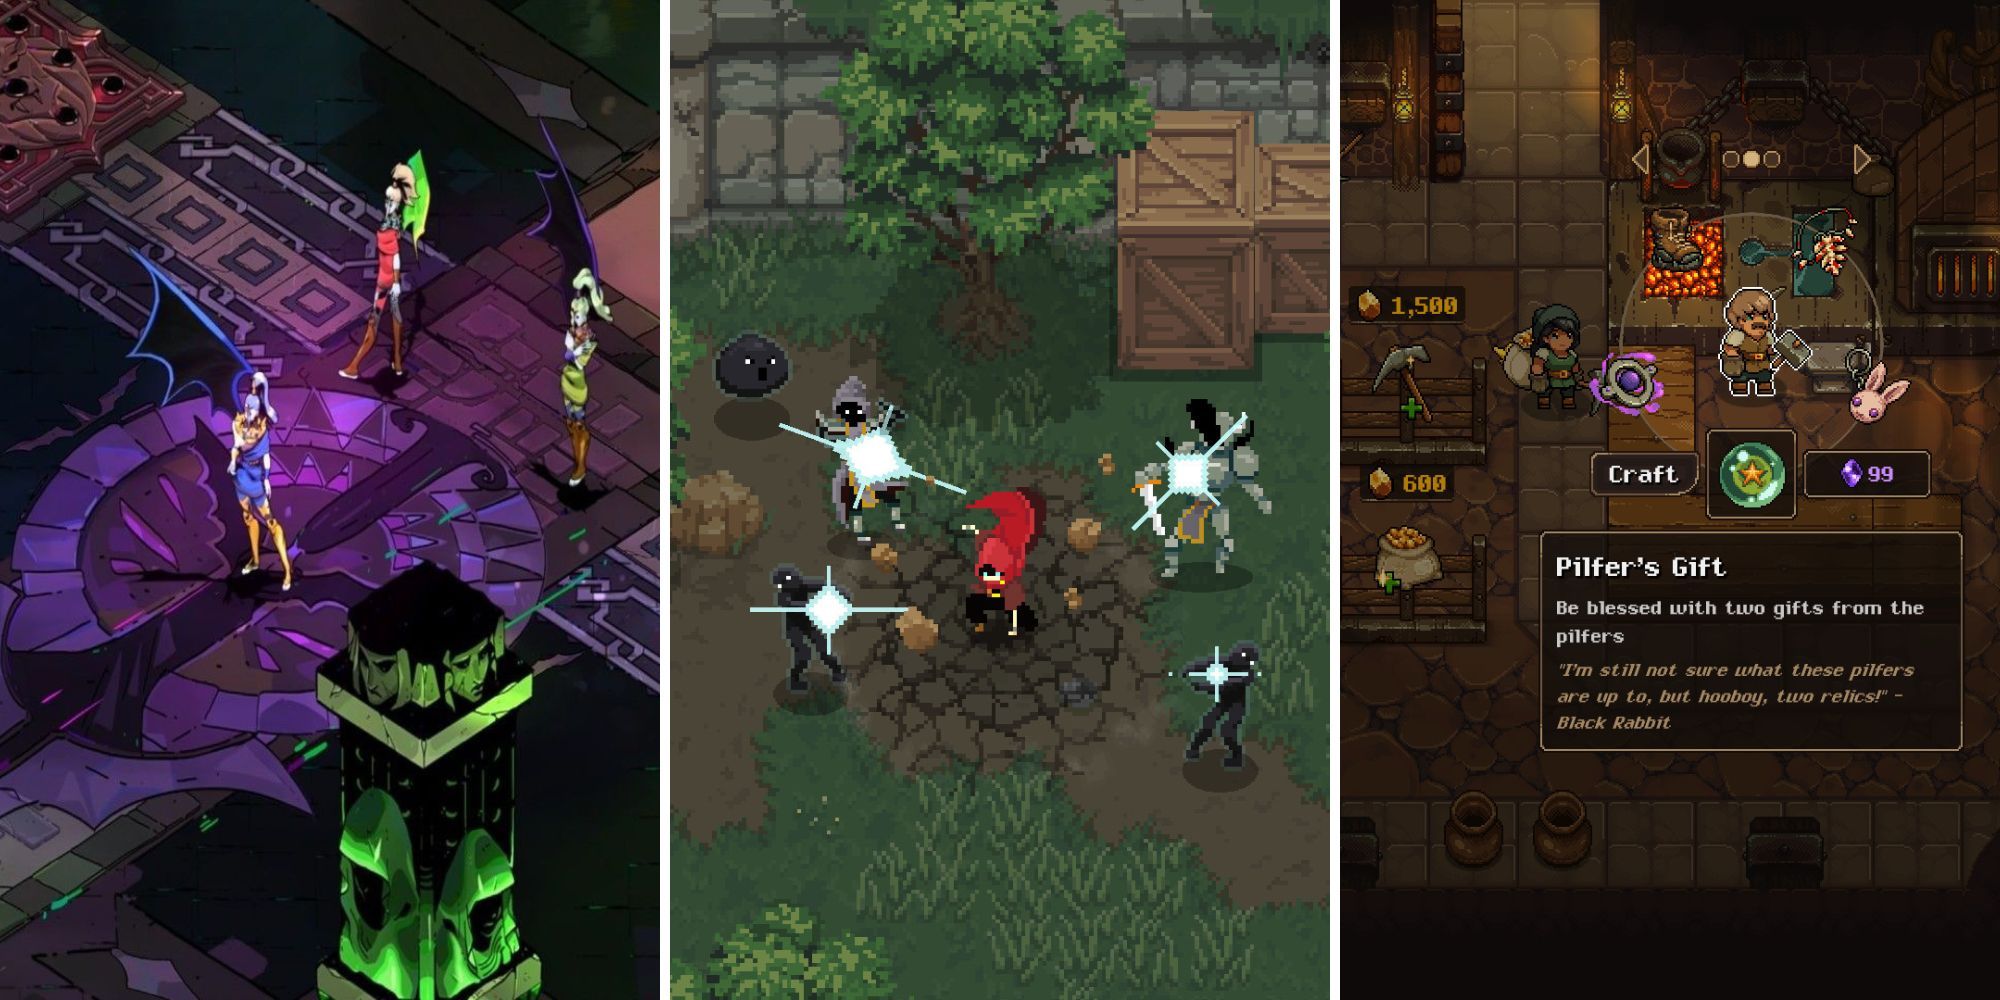 A grid of images showing the three roguelike games Hades, Wizard of Legend, and UnderMine